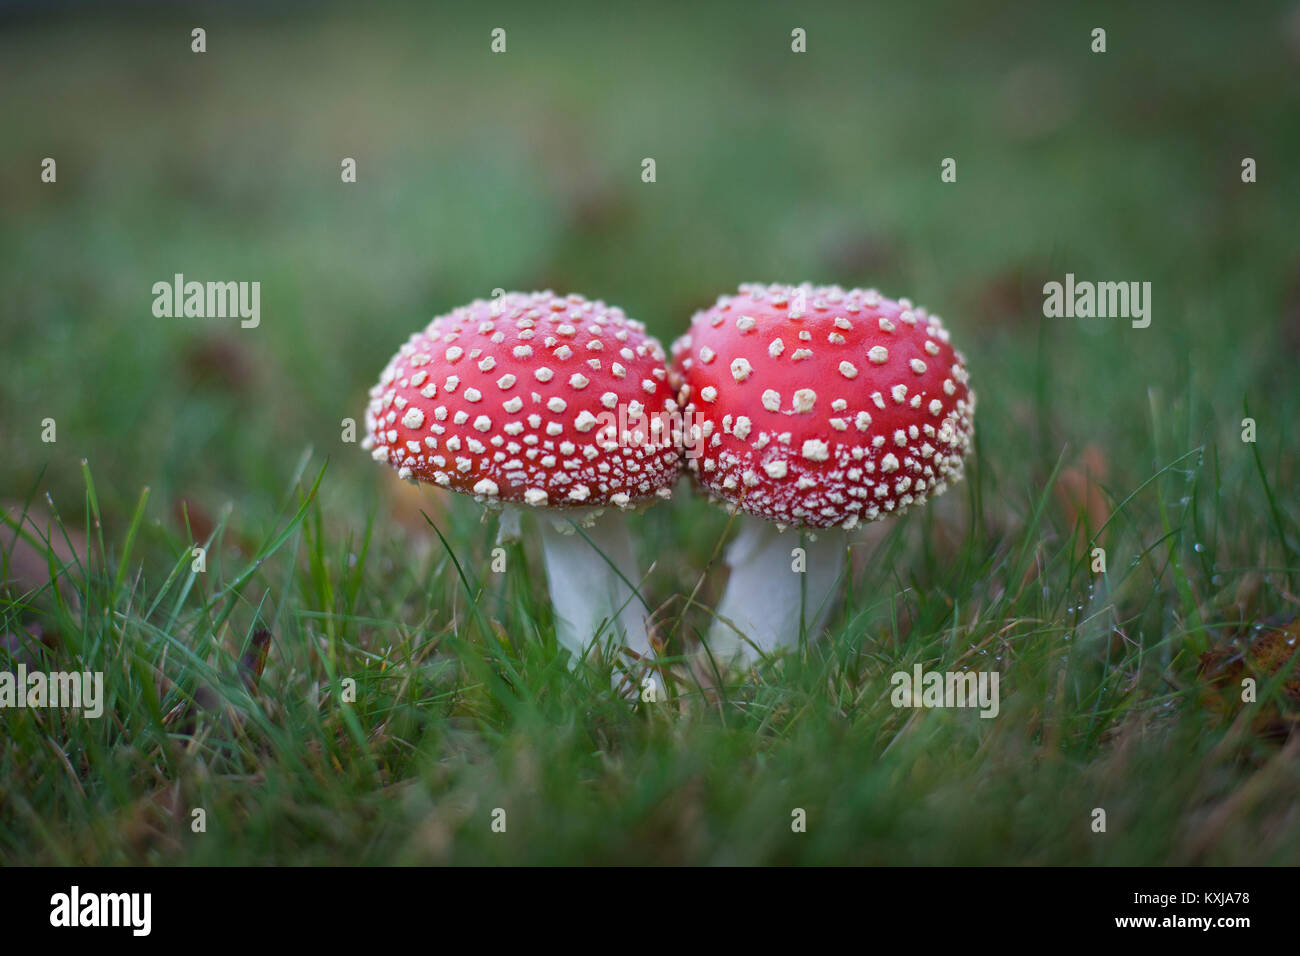 Close-up of fly agaric mushrooms growing on grassy field Stock Photo